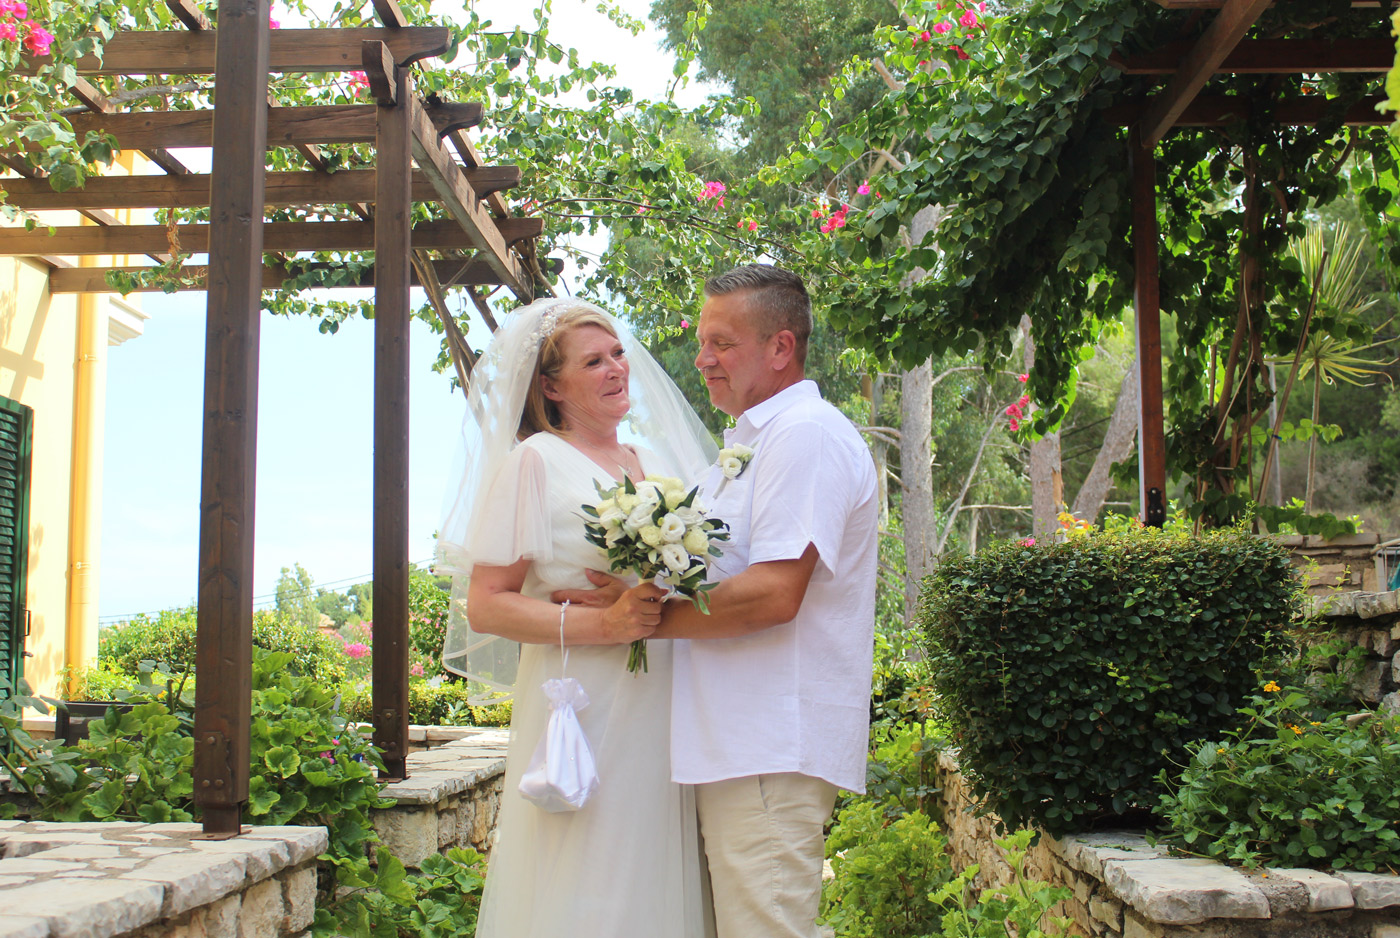 Weddings in Kefalonia | 9 Muses Hotel Skala Kefalonia | Hotel in Skala Kefalonia with small traditional chapel in a romantic setting is the ideal location to have the wedding day of your dreams. Kefalonia Wedding Reception Venues, Wedding Packages Kefalonia, Kefalonia Weddings, Kefalonia Wedding Planners, Wedding Hotels in Kefalonia, Weddings in Skala Kefalonia,